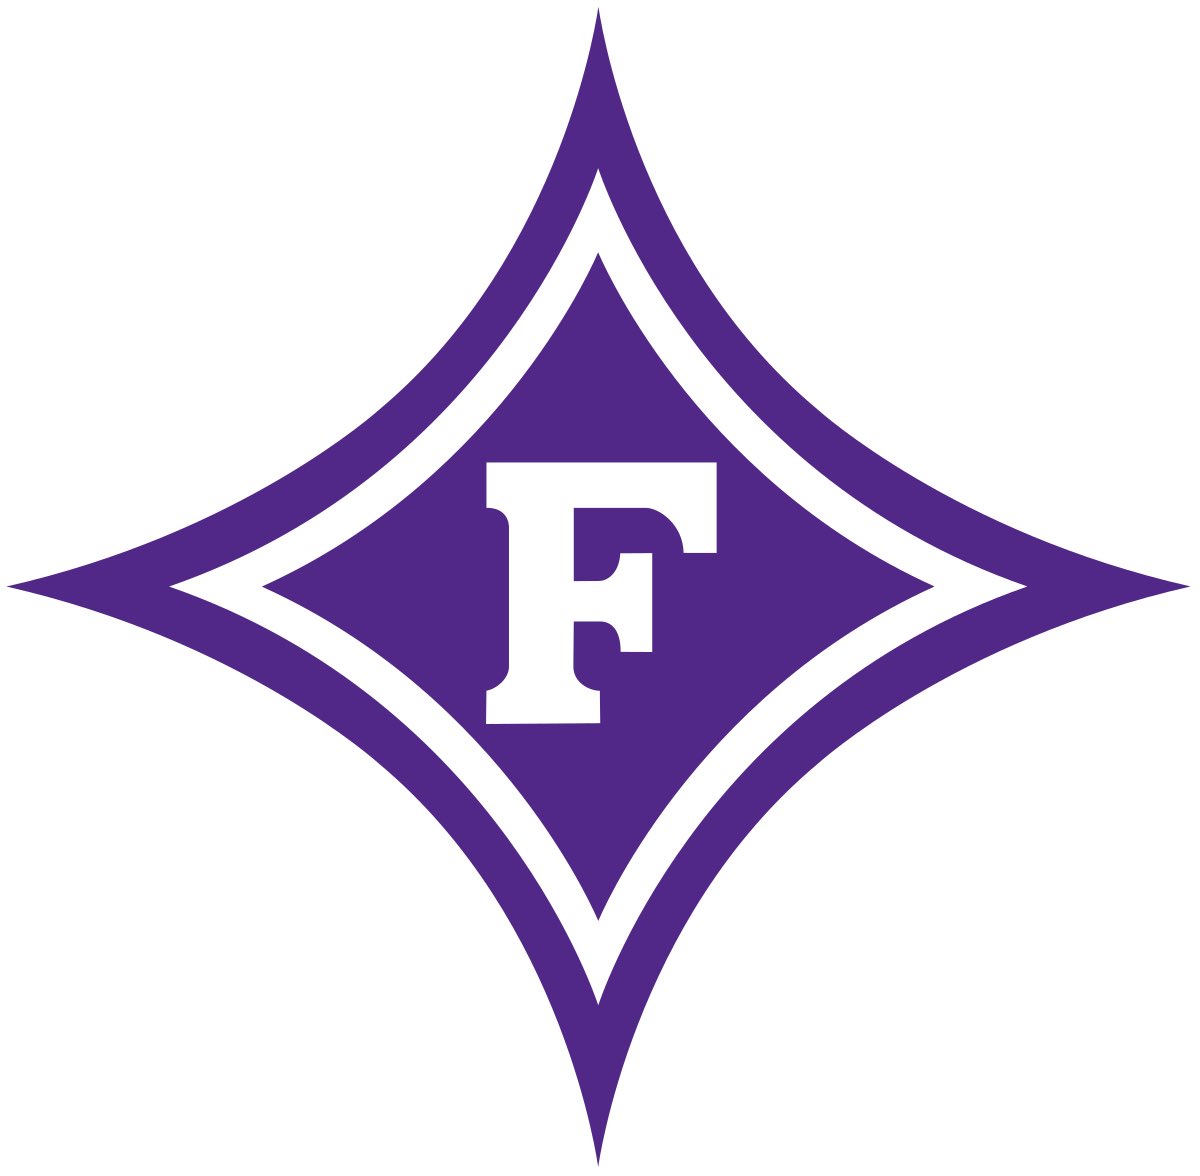 After great conversations with @CSpangDB and @Coach_DVaughn I’m blessed to say I’ve received an offer from Furman University!